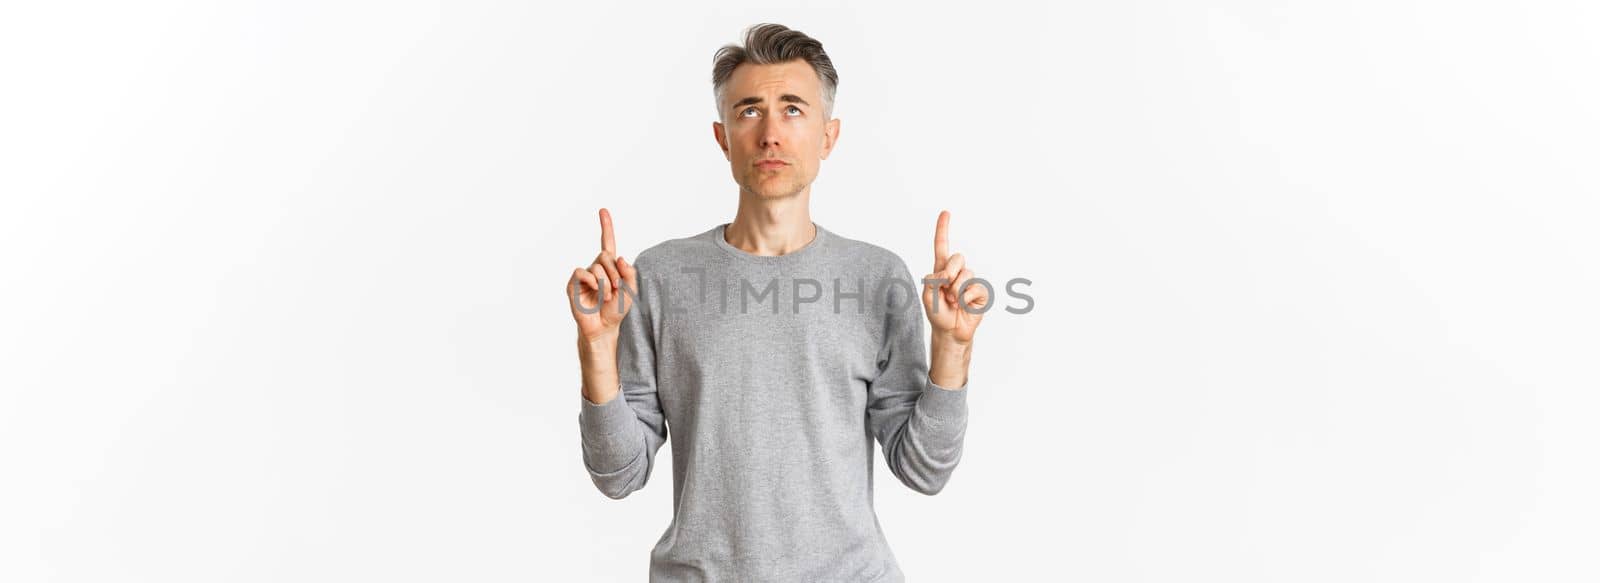 Portrait of gloomy and hesitant middle-aged man, looking troubled and pointing fingers up, standing upset over white background.